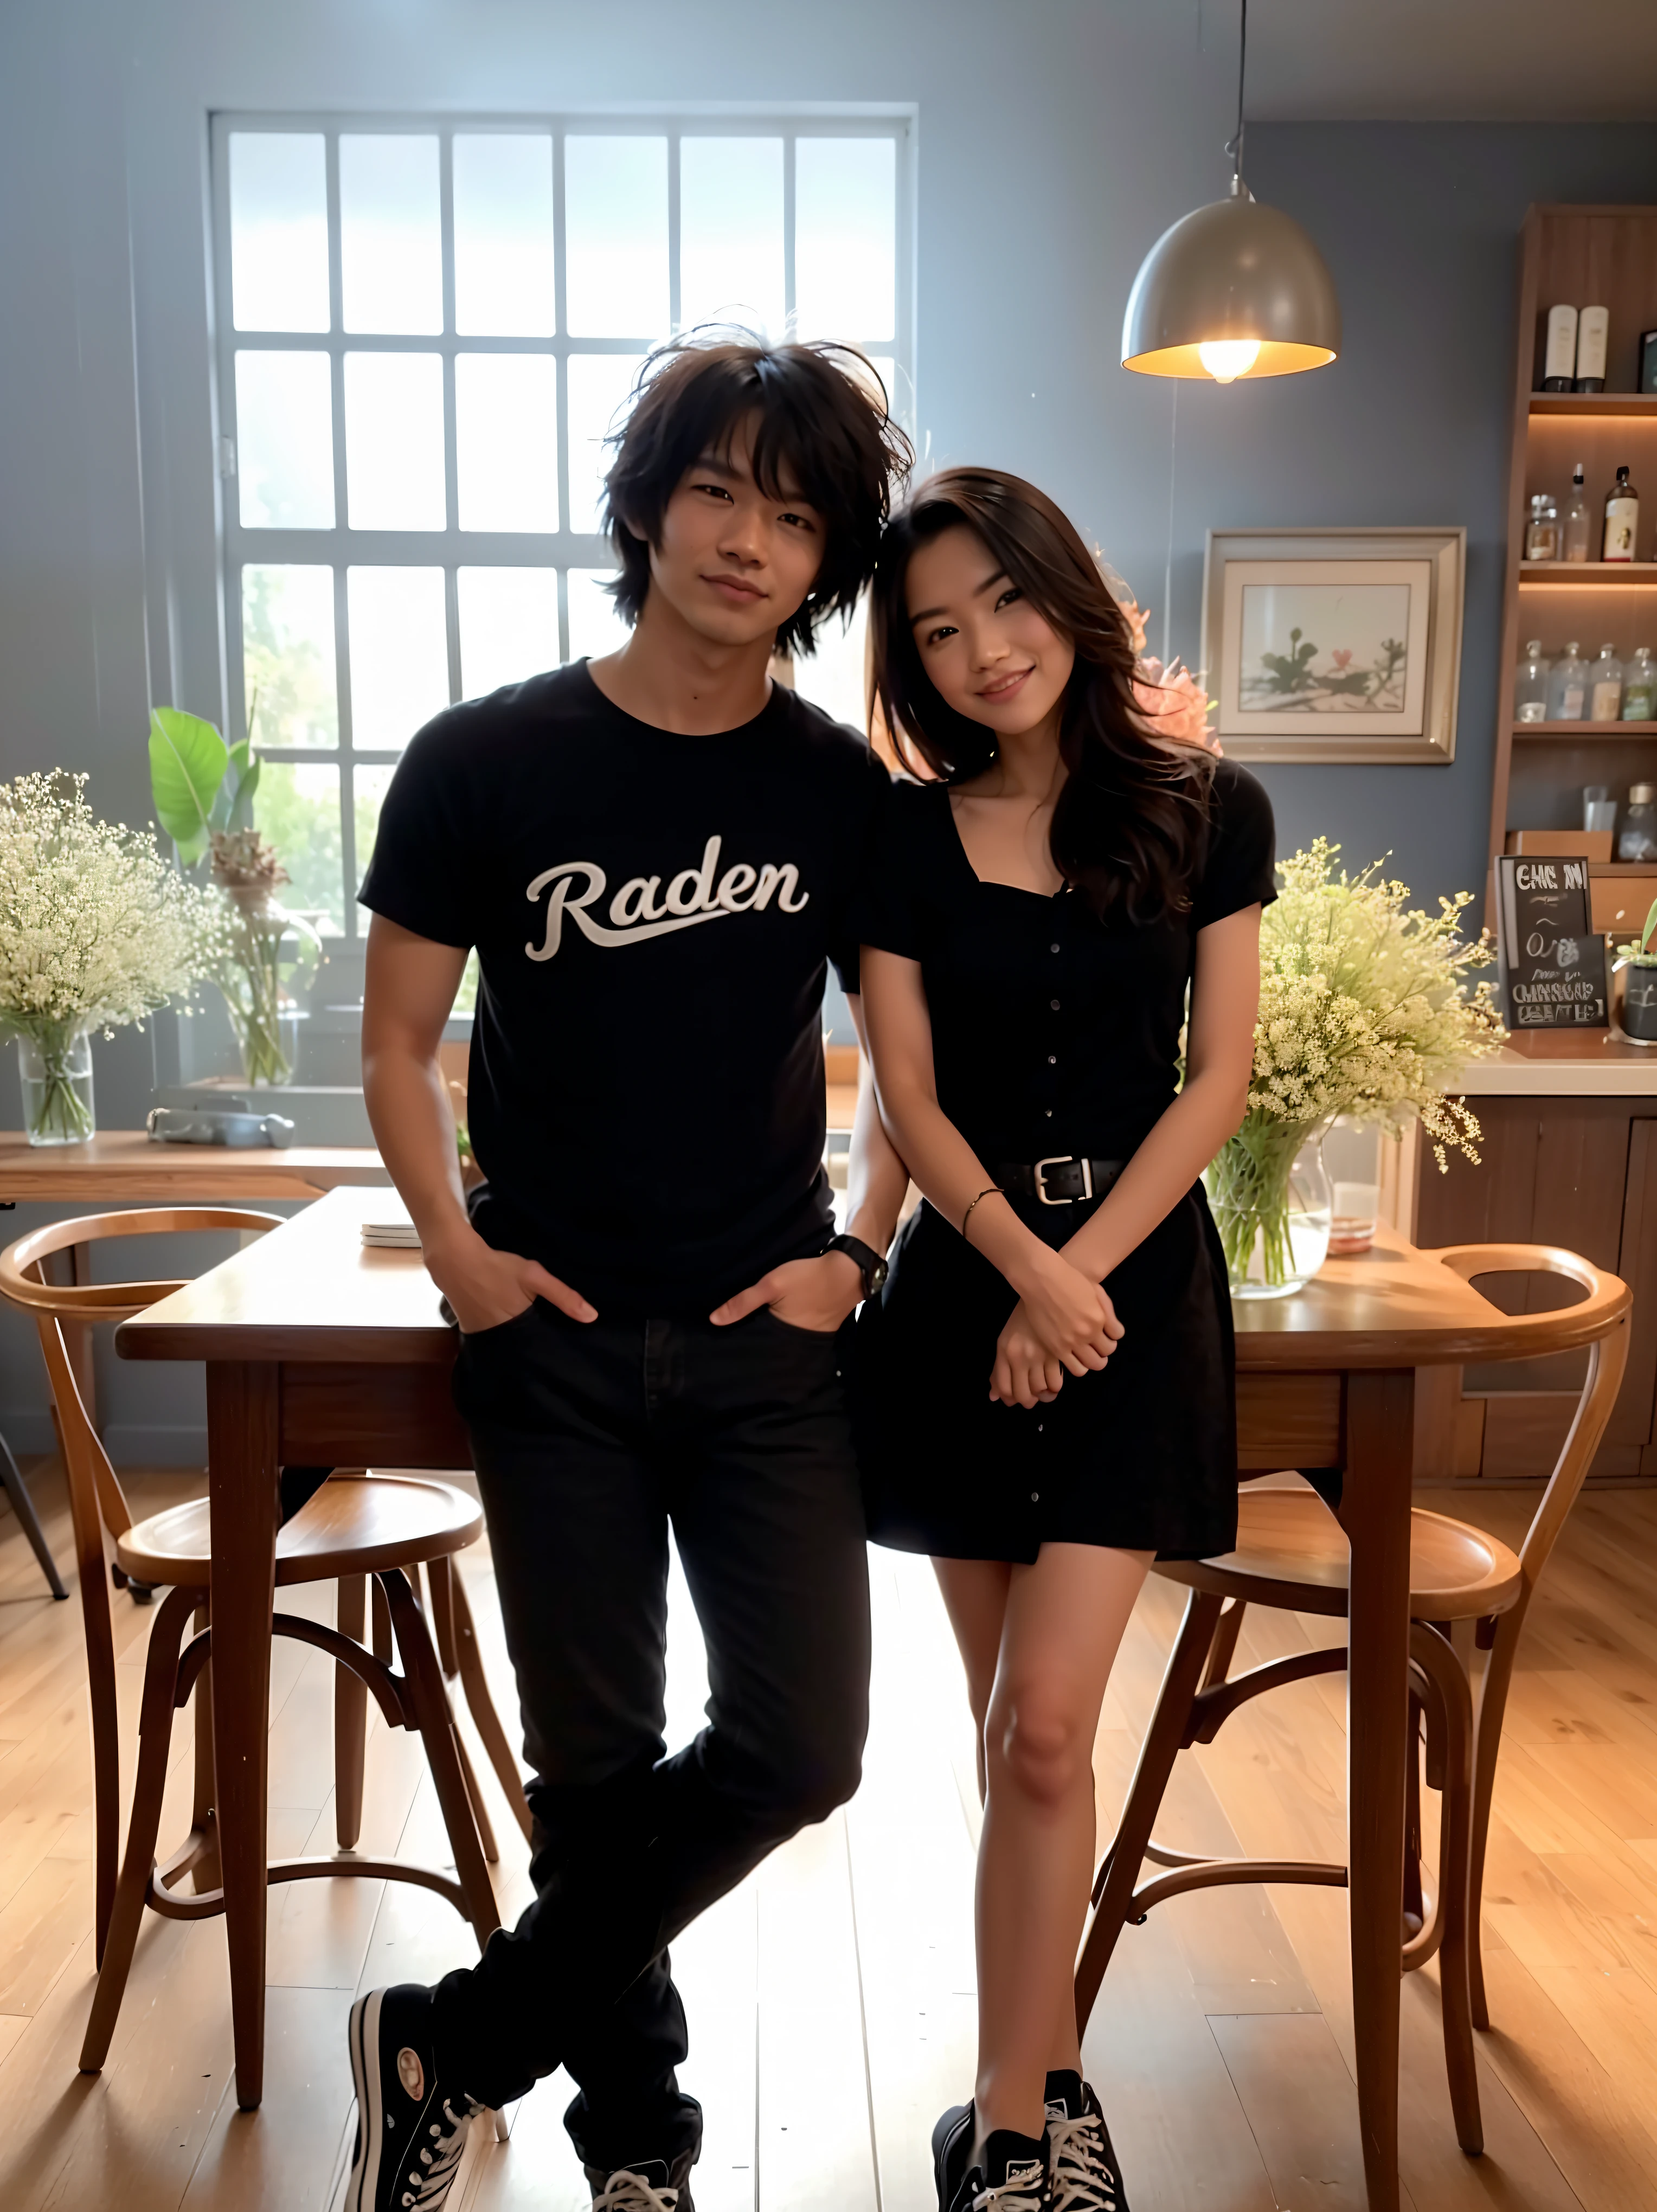 they are posing for a picture in a room with a table and chairs, ryden, taken with canon eos 5 d, taken with a canon eos 5 d, taken with a canon eos 5d, taken with canon eos 5 d mark iv, with black, garden road, photoshoot, couple pose, taken with sony alpha 9, taken with canon 8 0 d